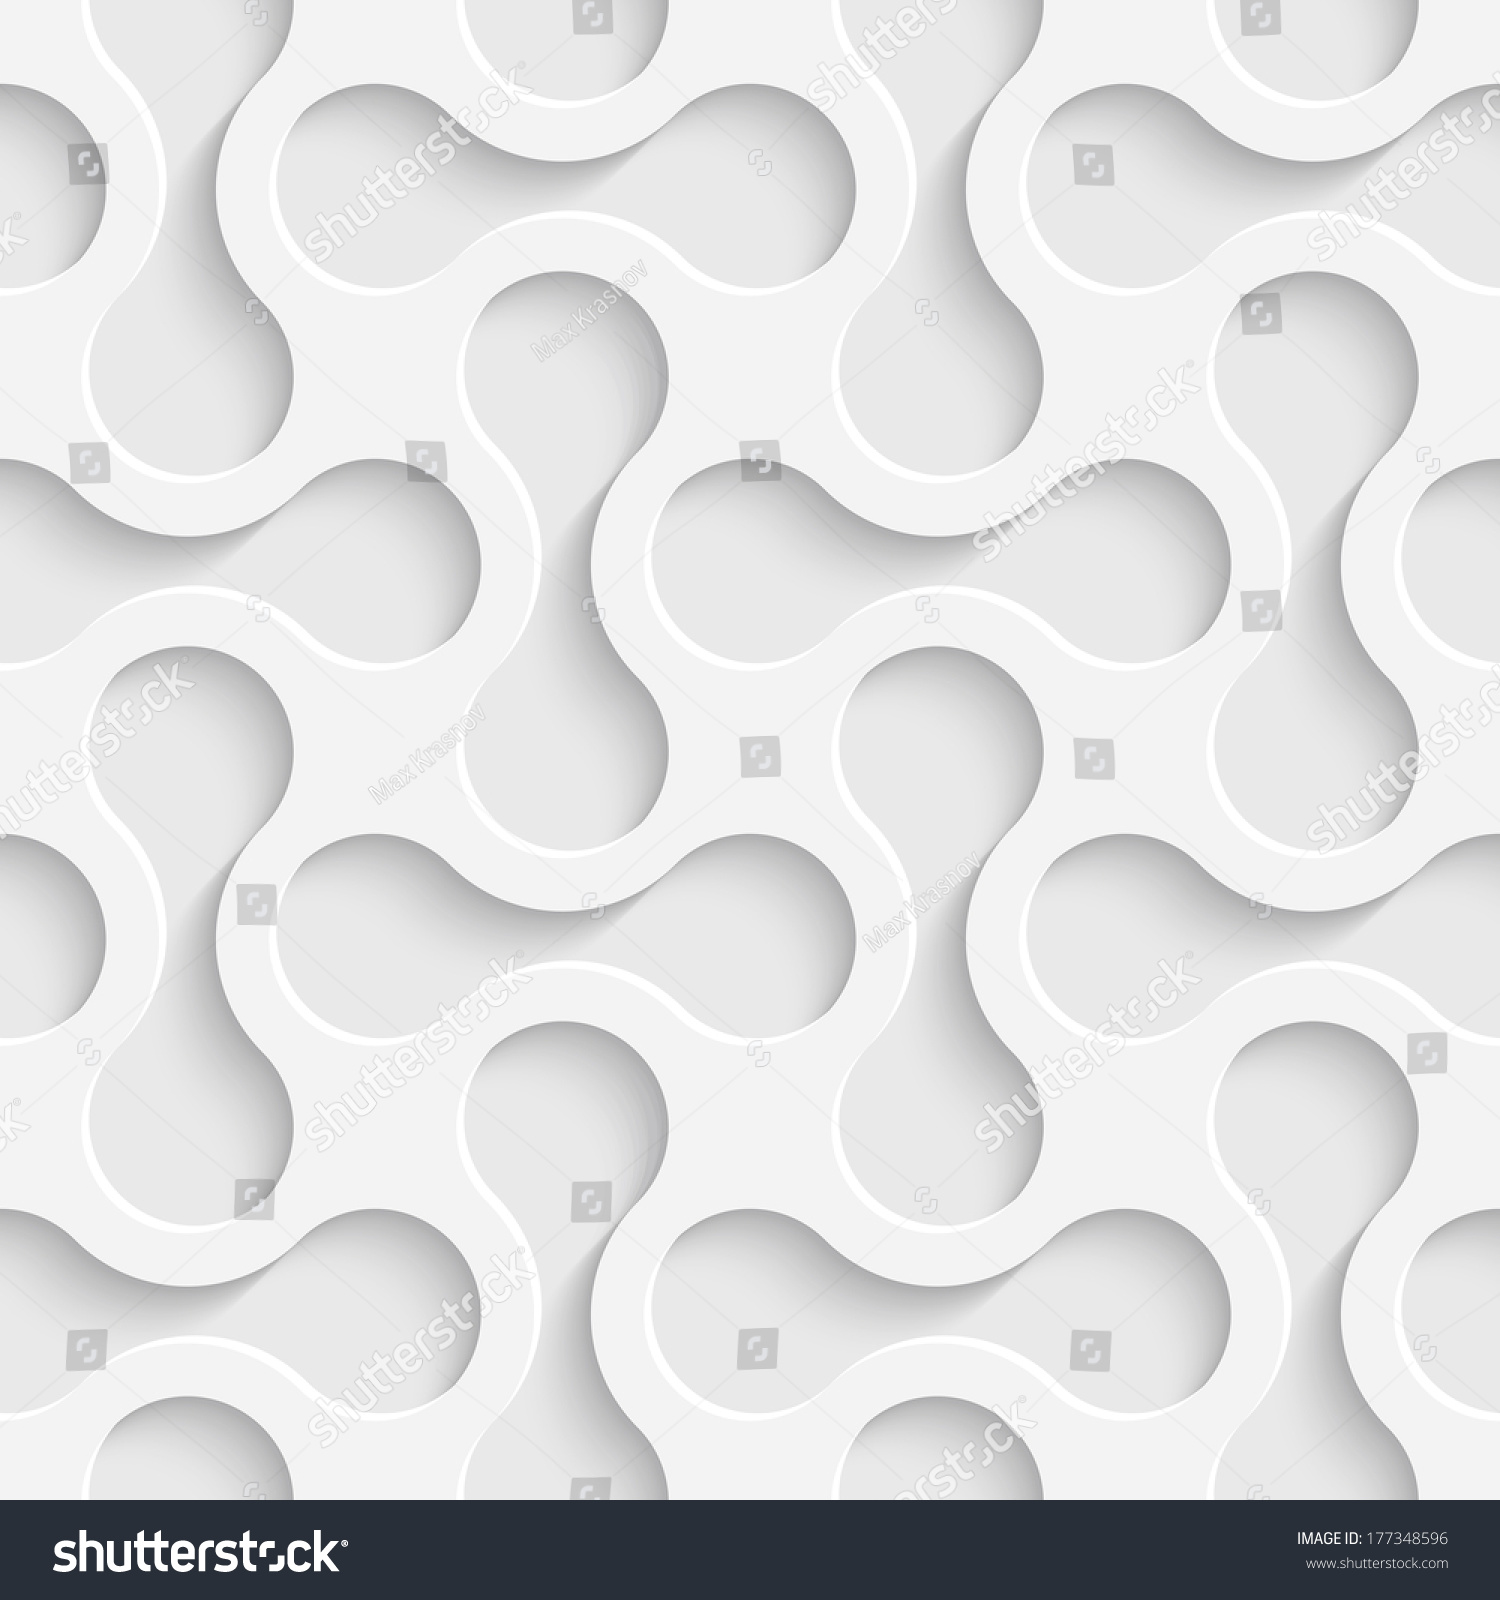 Seamless Abstract Geometric Pattern Frame Border Stock Vector